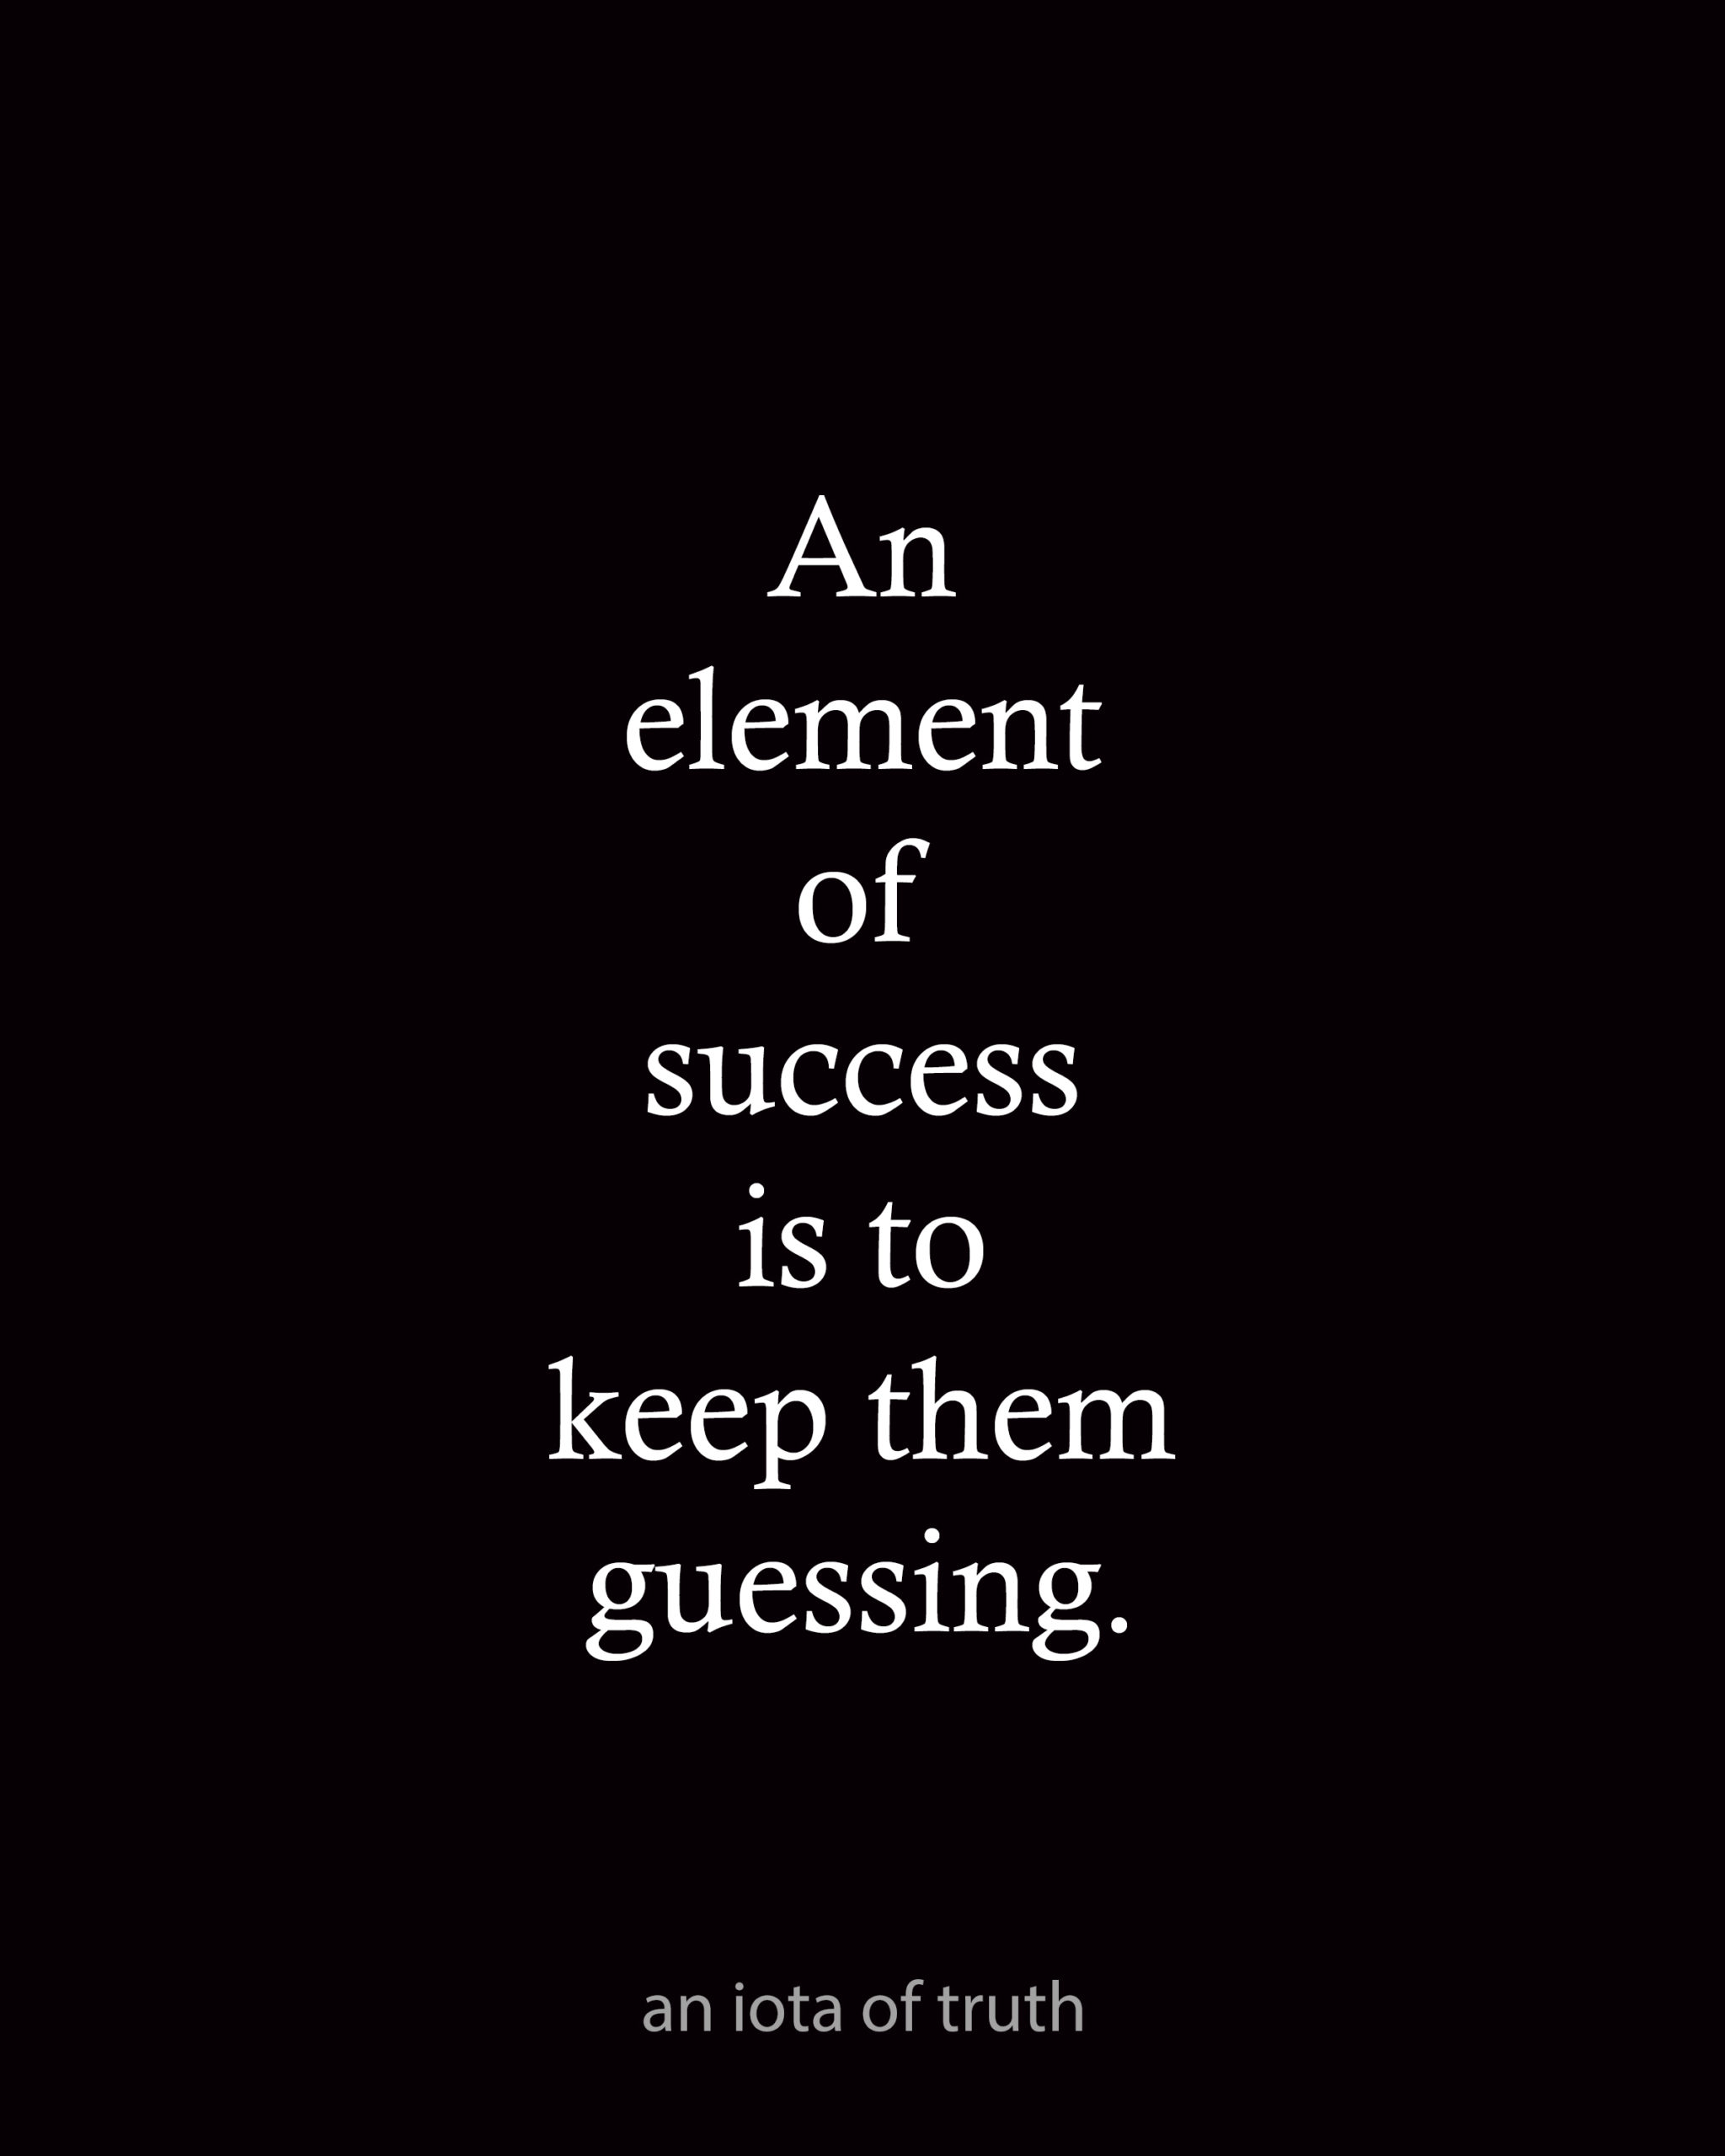 An element of success is to keep them guessing.